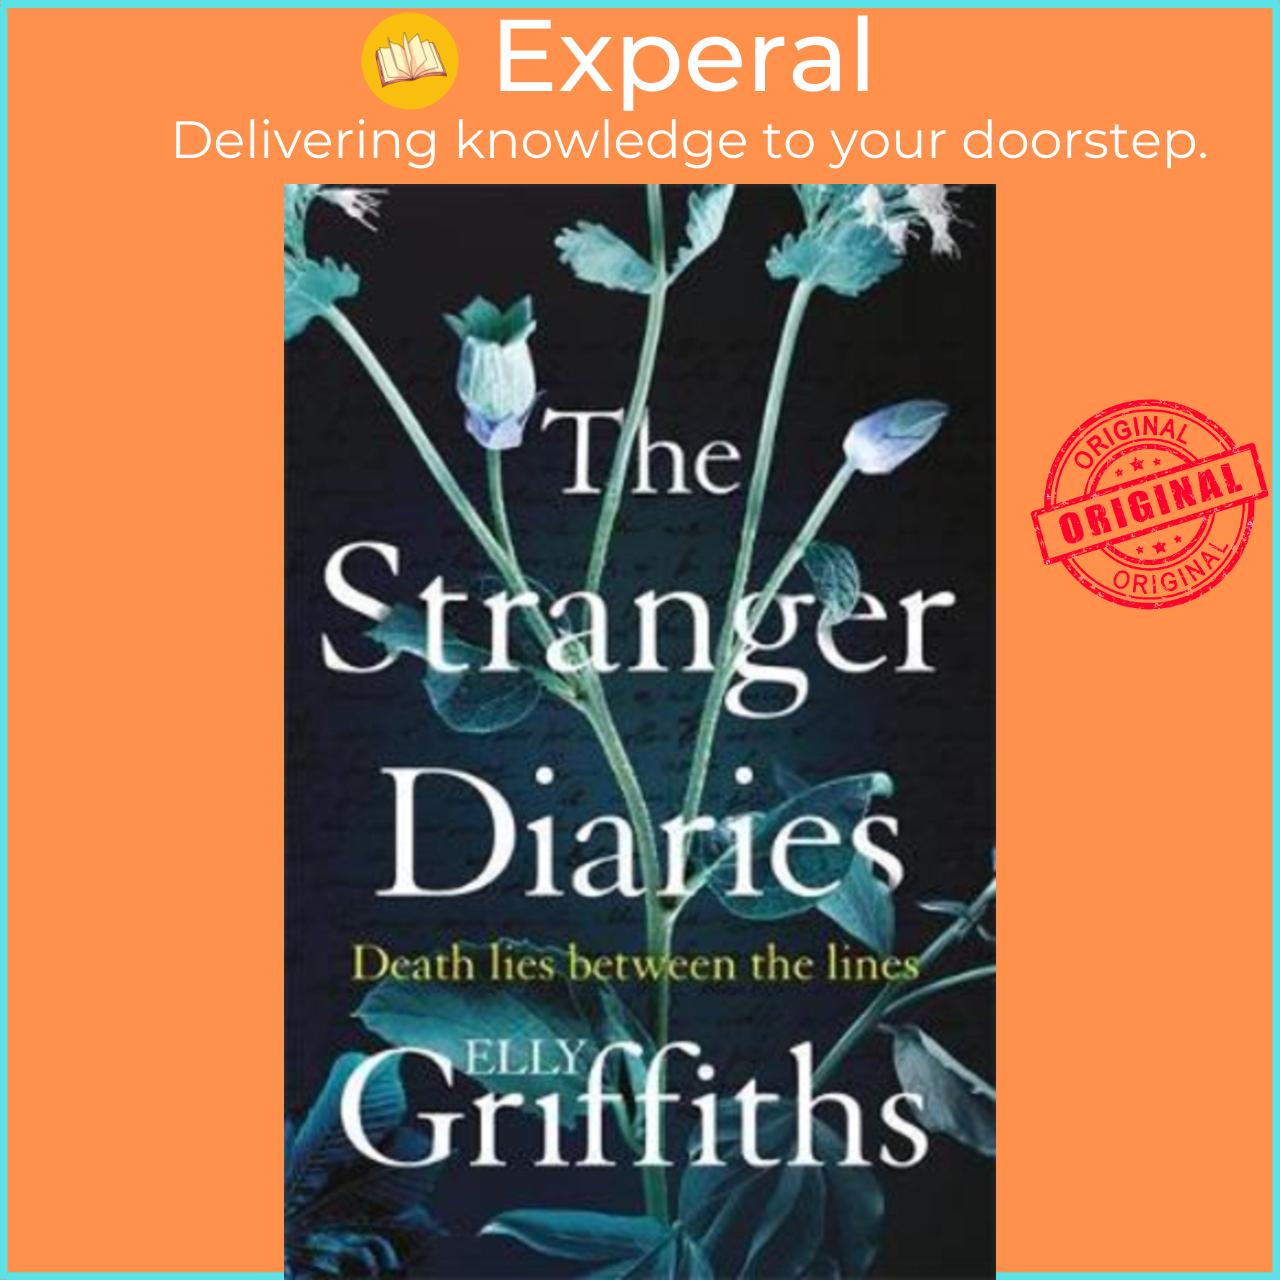 Sách - The Stranger Diaries : a gripping Gothic mystery perfect for dark autum by Elly Griffiths (UK edition, paperback)